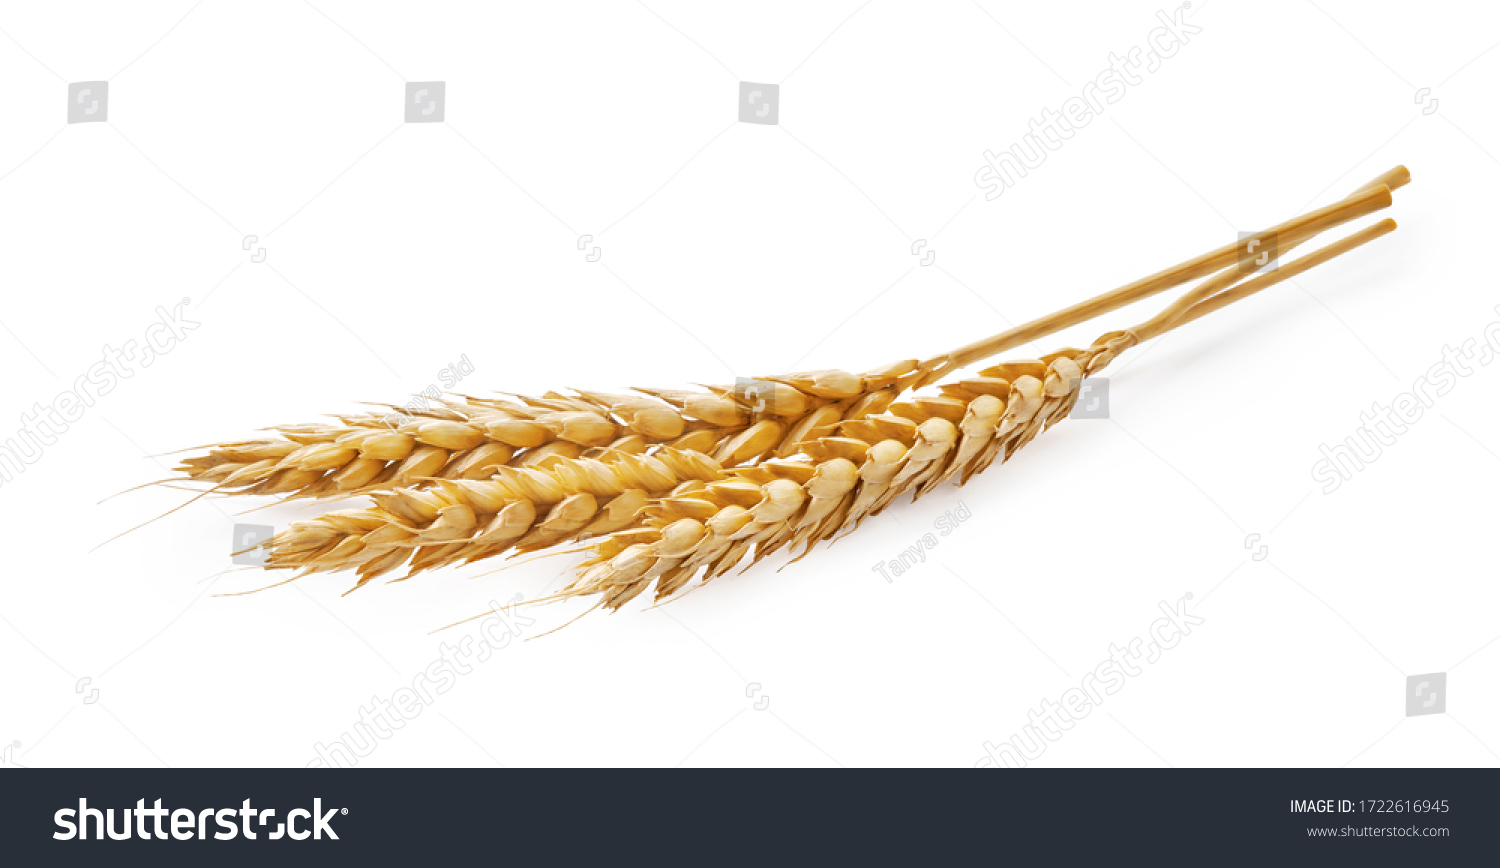 Three wheat spikelets isolated on white background #1722616945